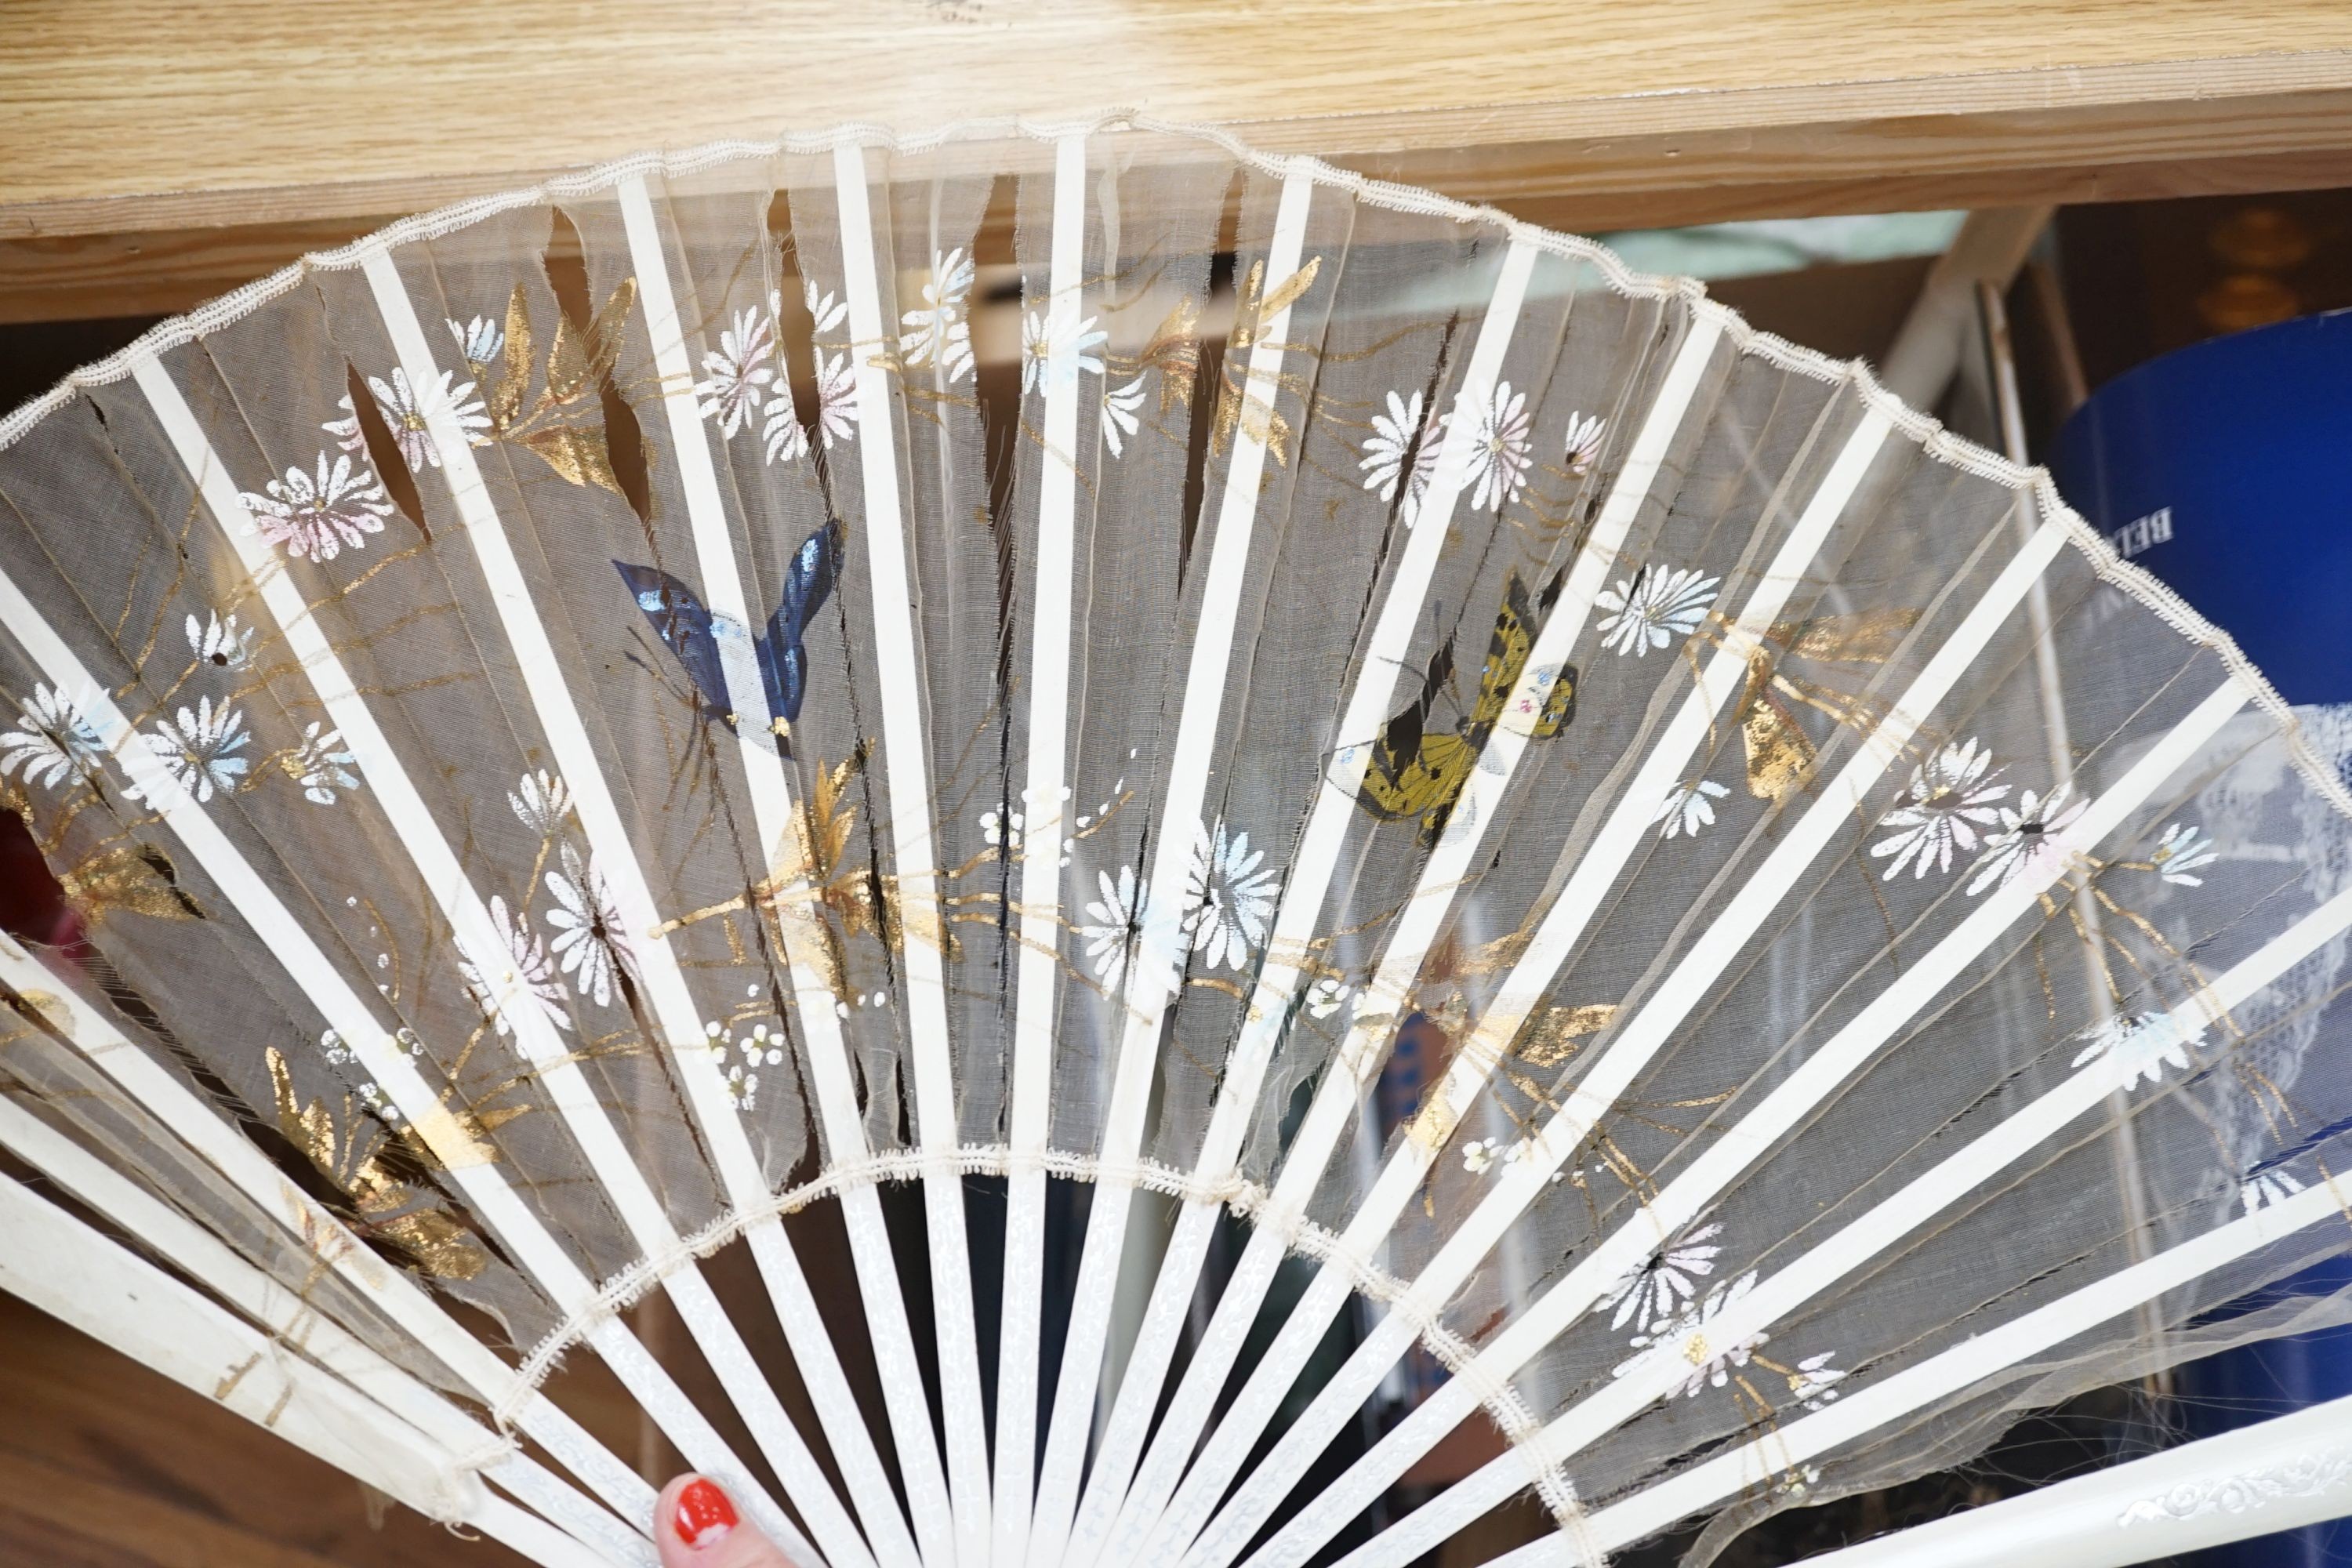 A quantity of lace makers items, Victorian parasols, 7 other fans, a fan frame, a 900 silver bag mount, a silver mother of pearl page turner, and other items